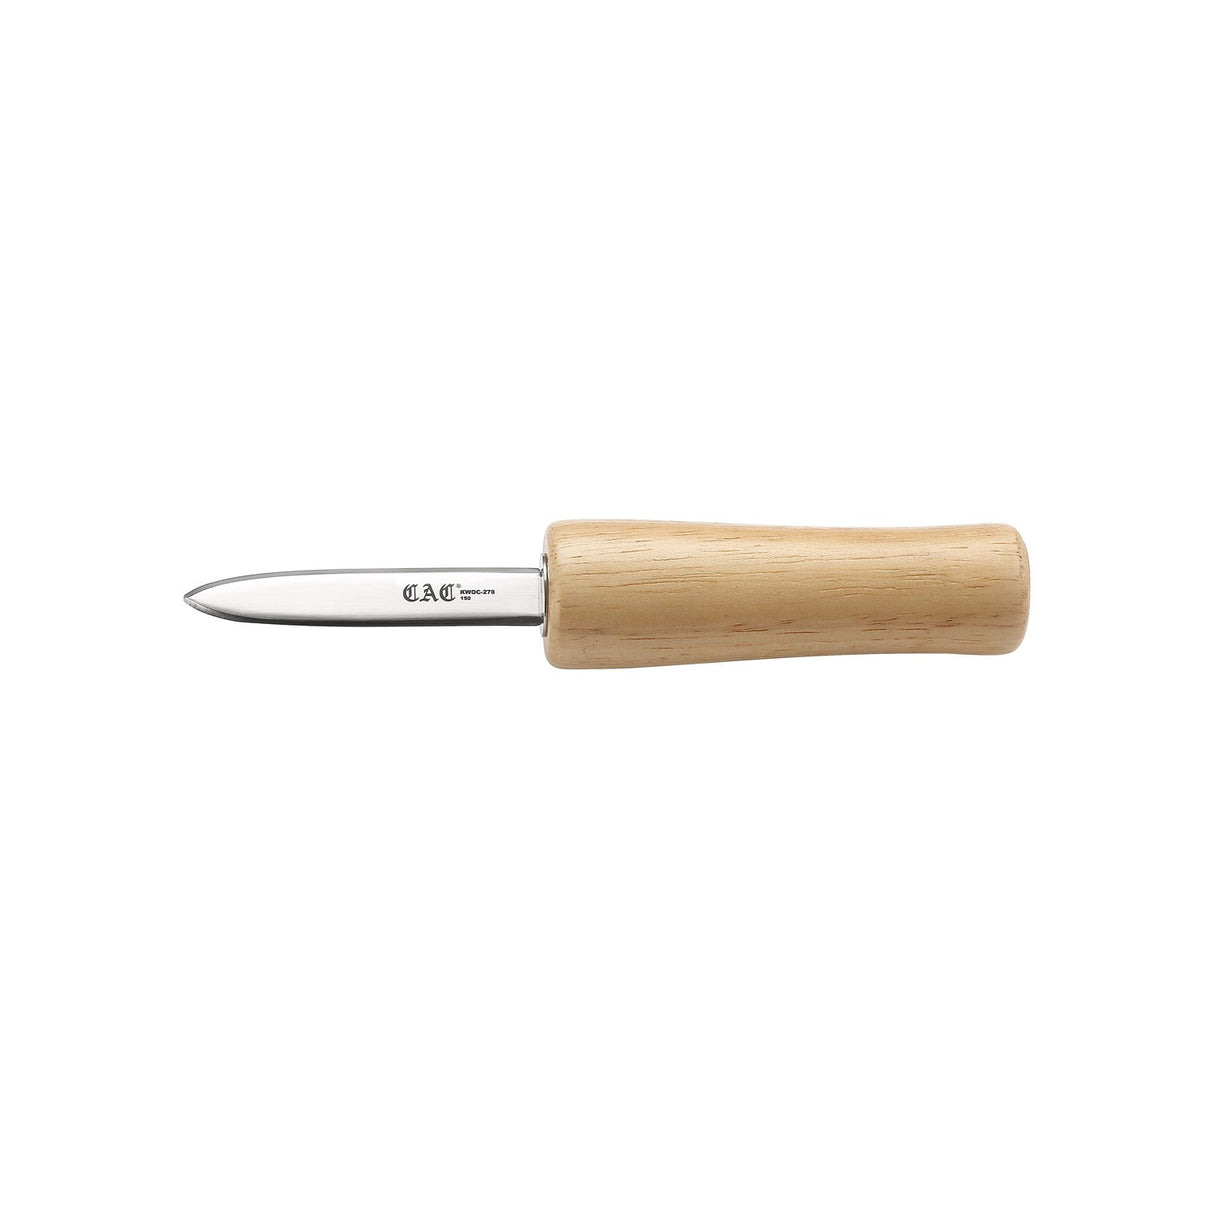 Knife Oyster/Clam Pointed Tip Wood Hdl 2-7/8"